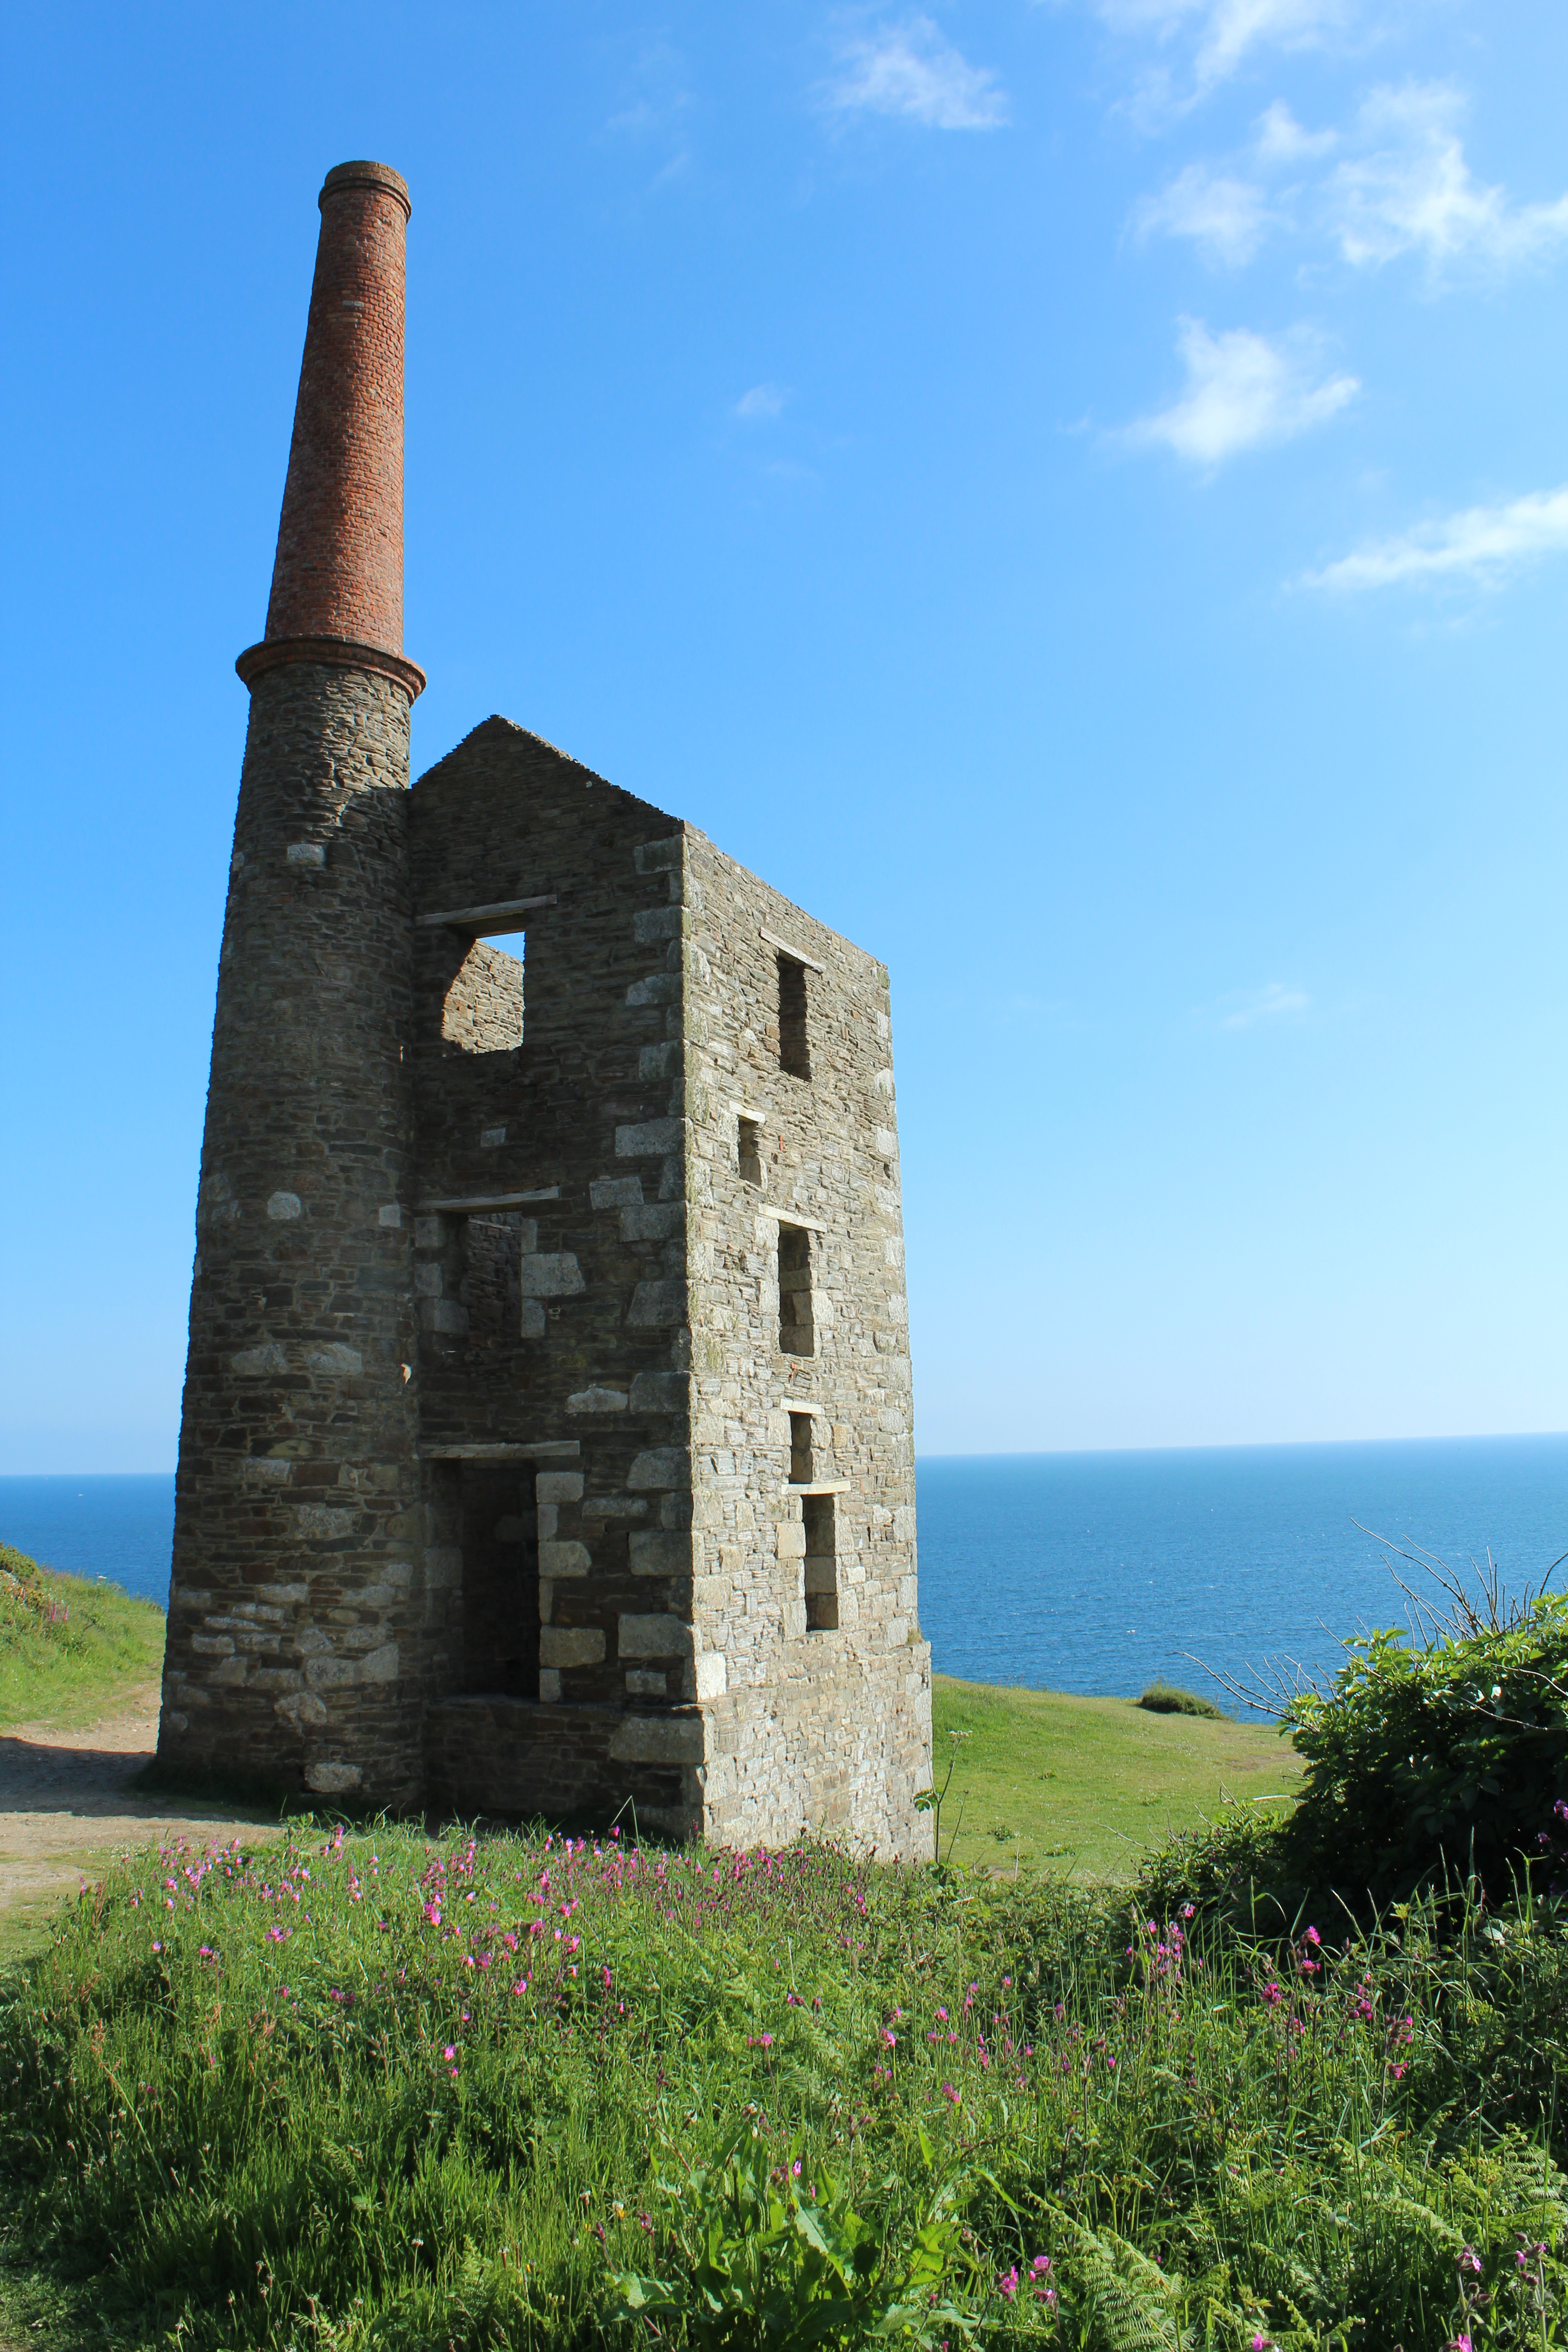 Staycation favourites – Cornwall, Norfolk and Cumbria